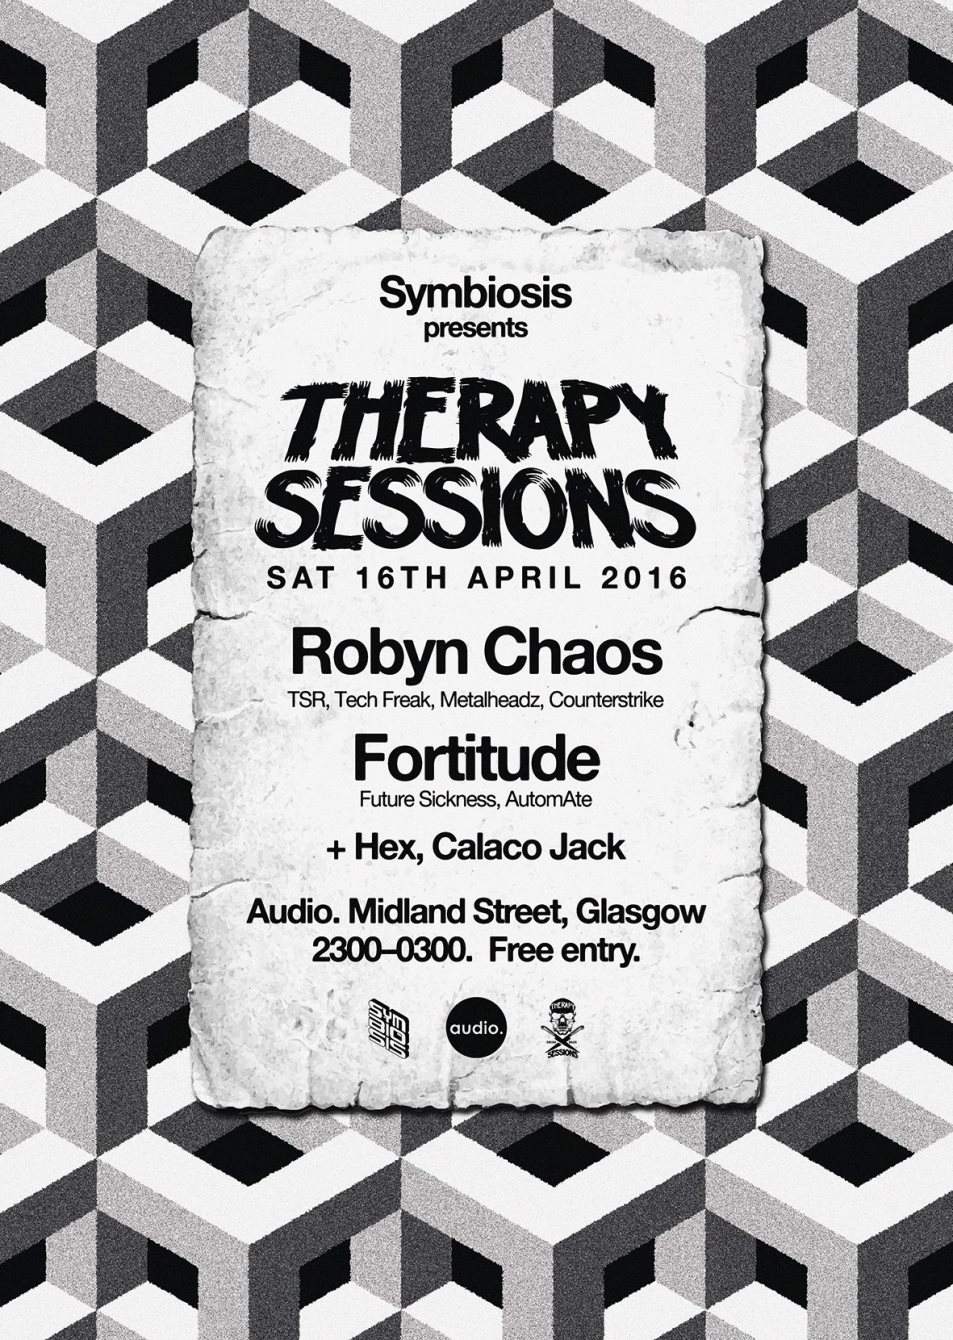 Symbiosis presents Therapy Sessions - フライヤー表